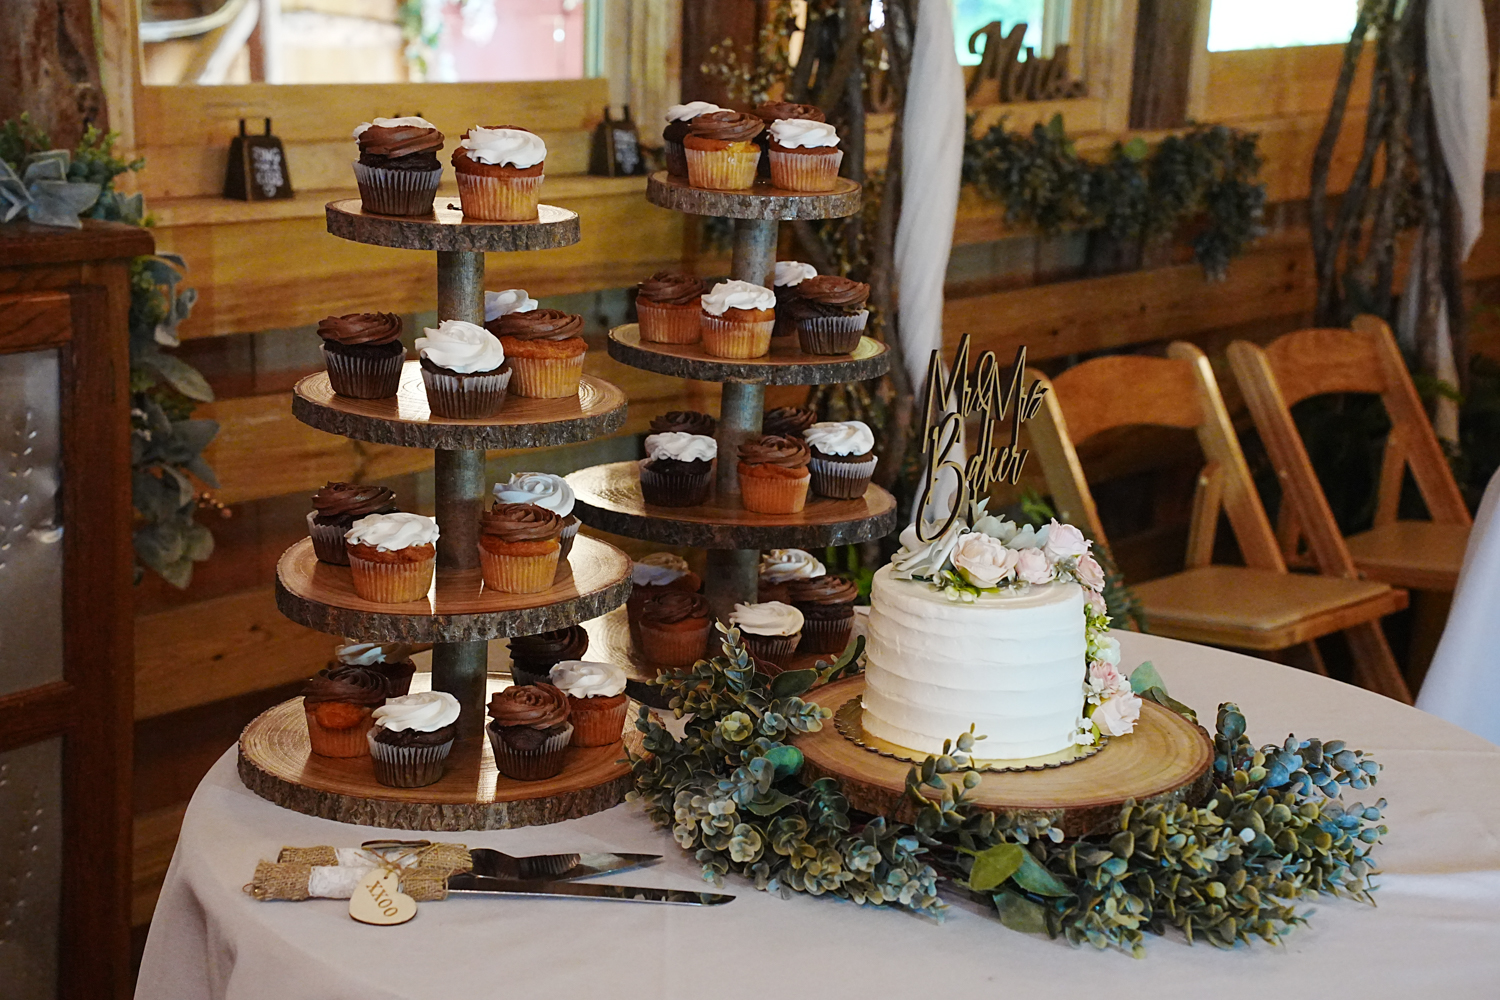 Wedding cakes and cupcakes on display